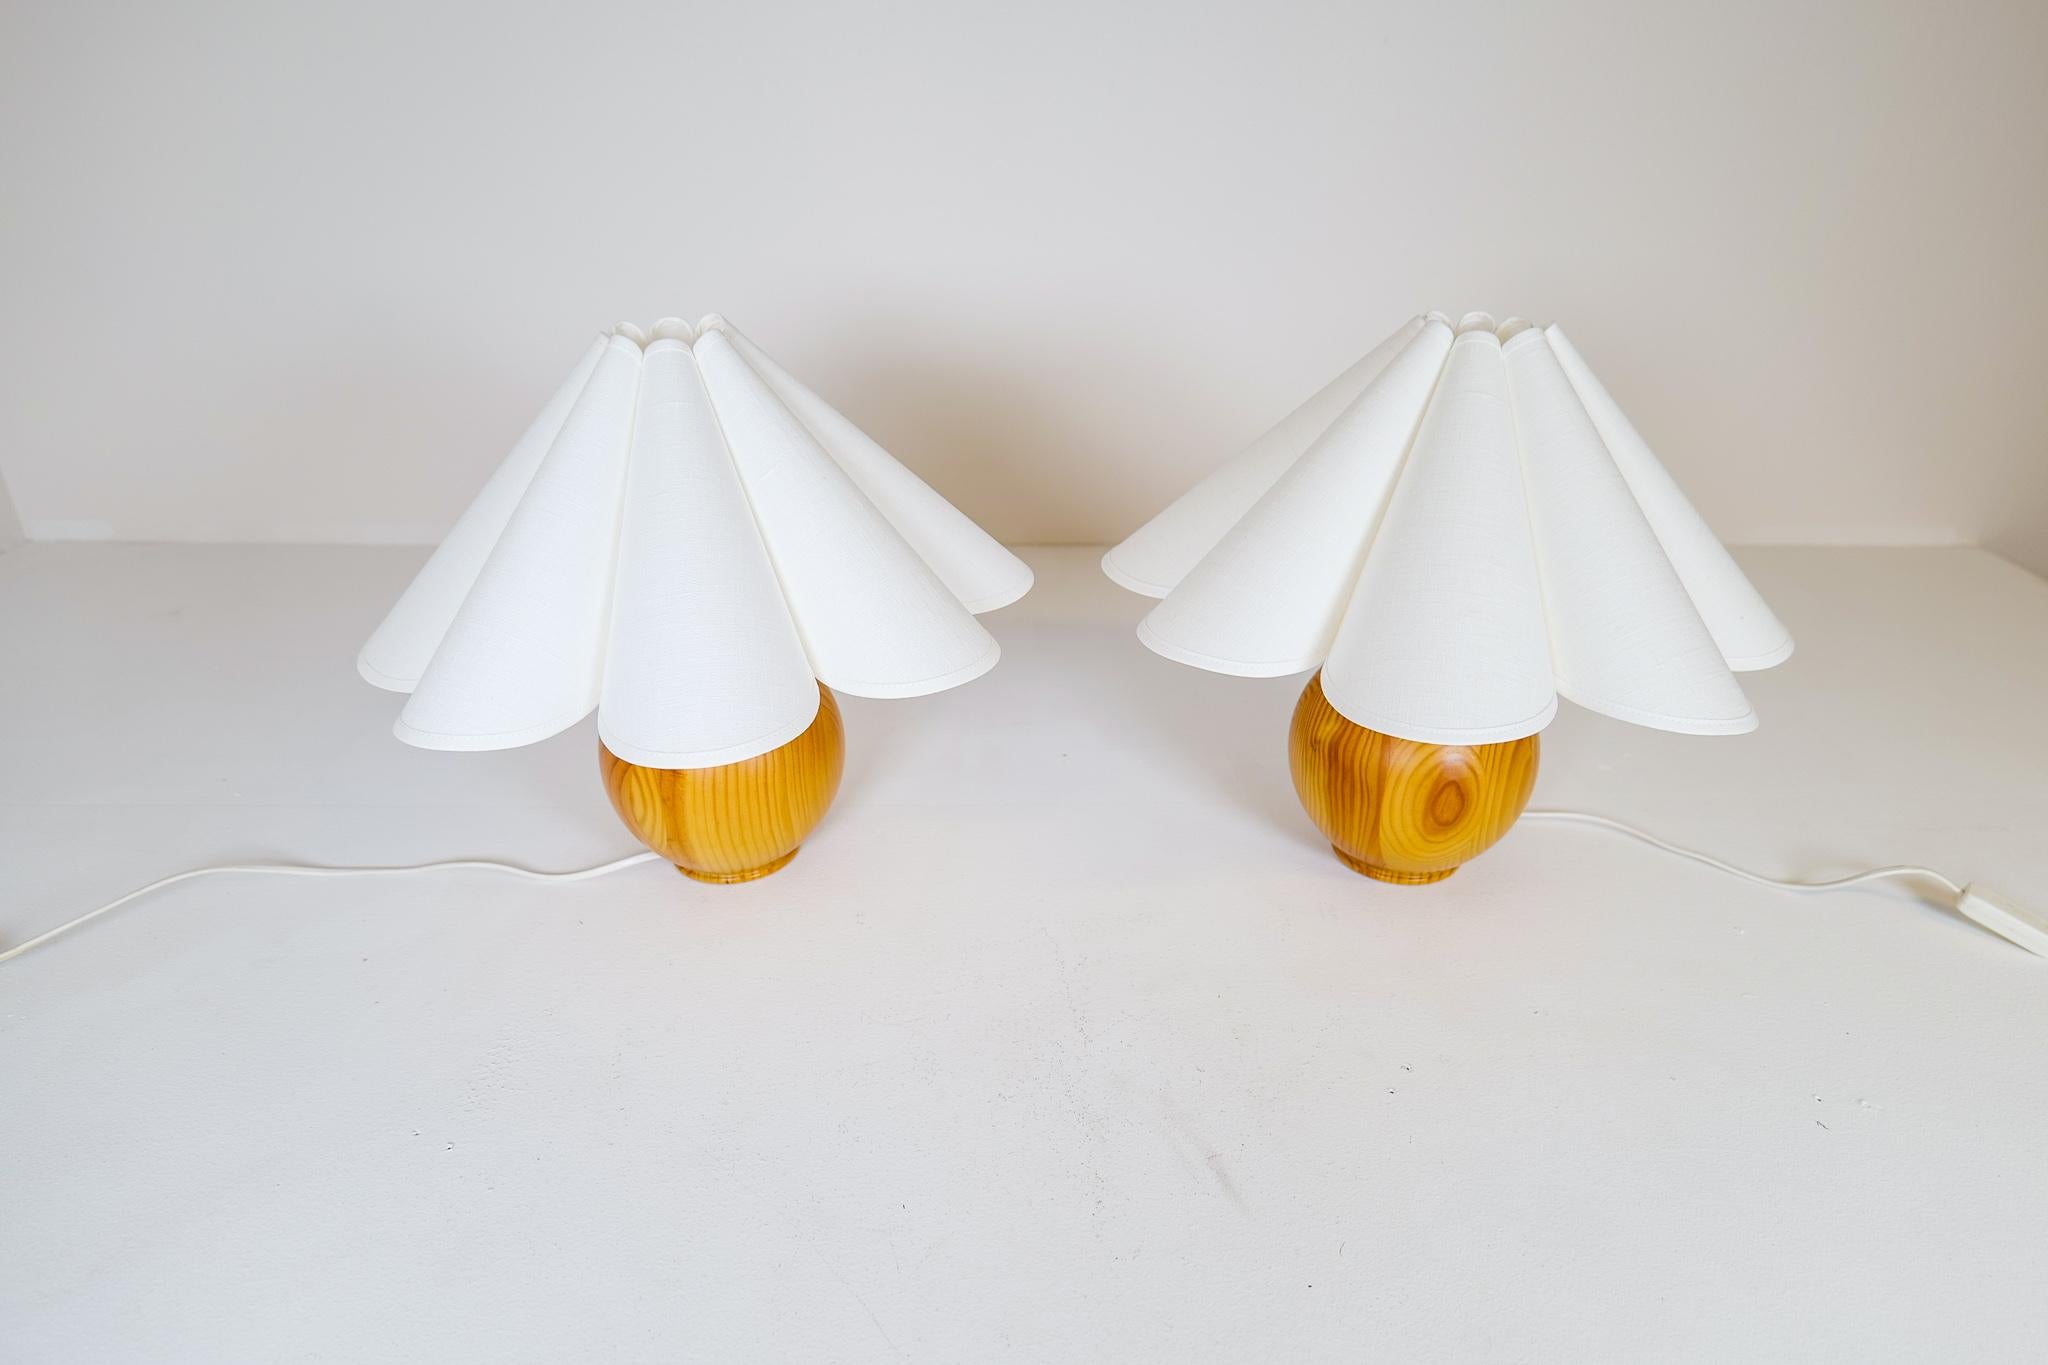 Mid-Century Modern Sculptural Table Lamps in Solid Pine, Sweden, 1970s For Sale 2